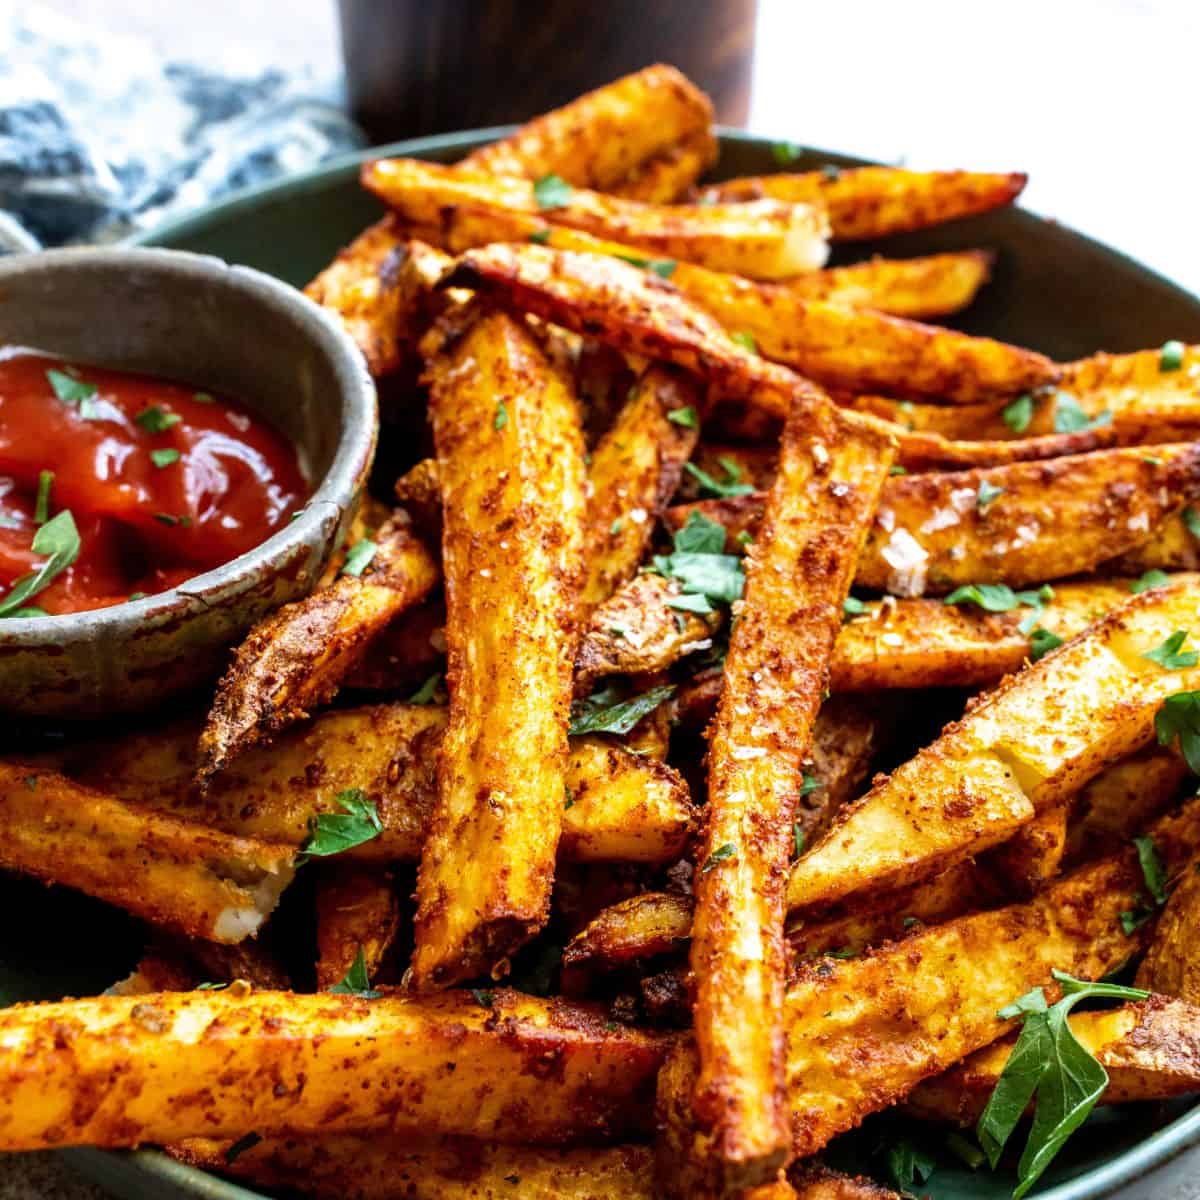 Crispy Homemade Fries up close and served with ketchup. 